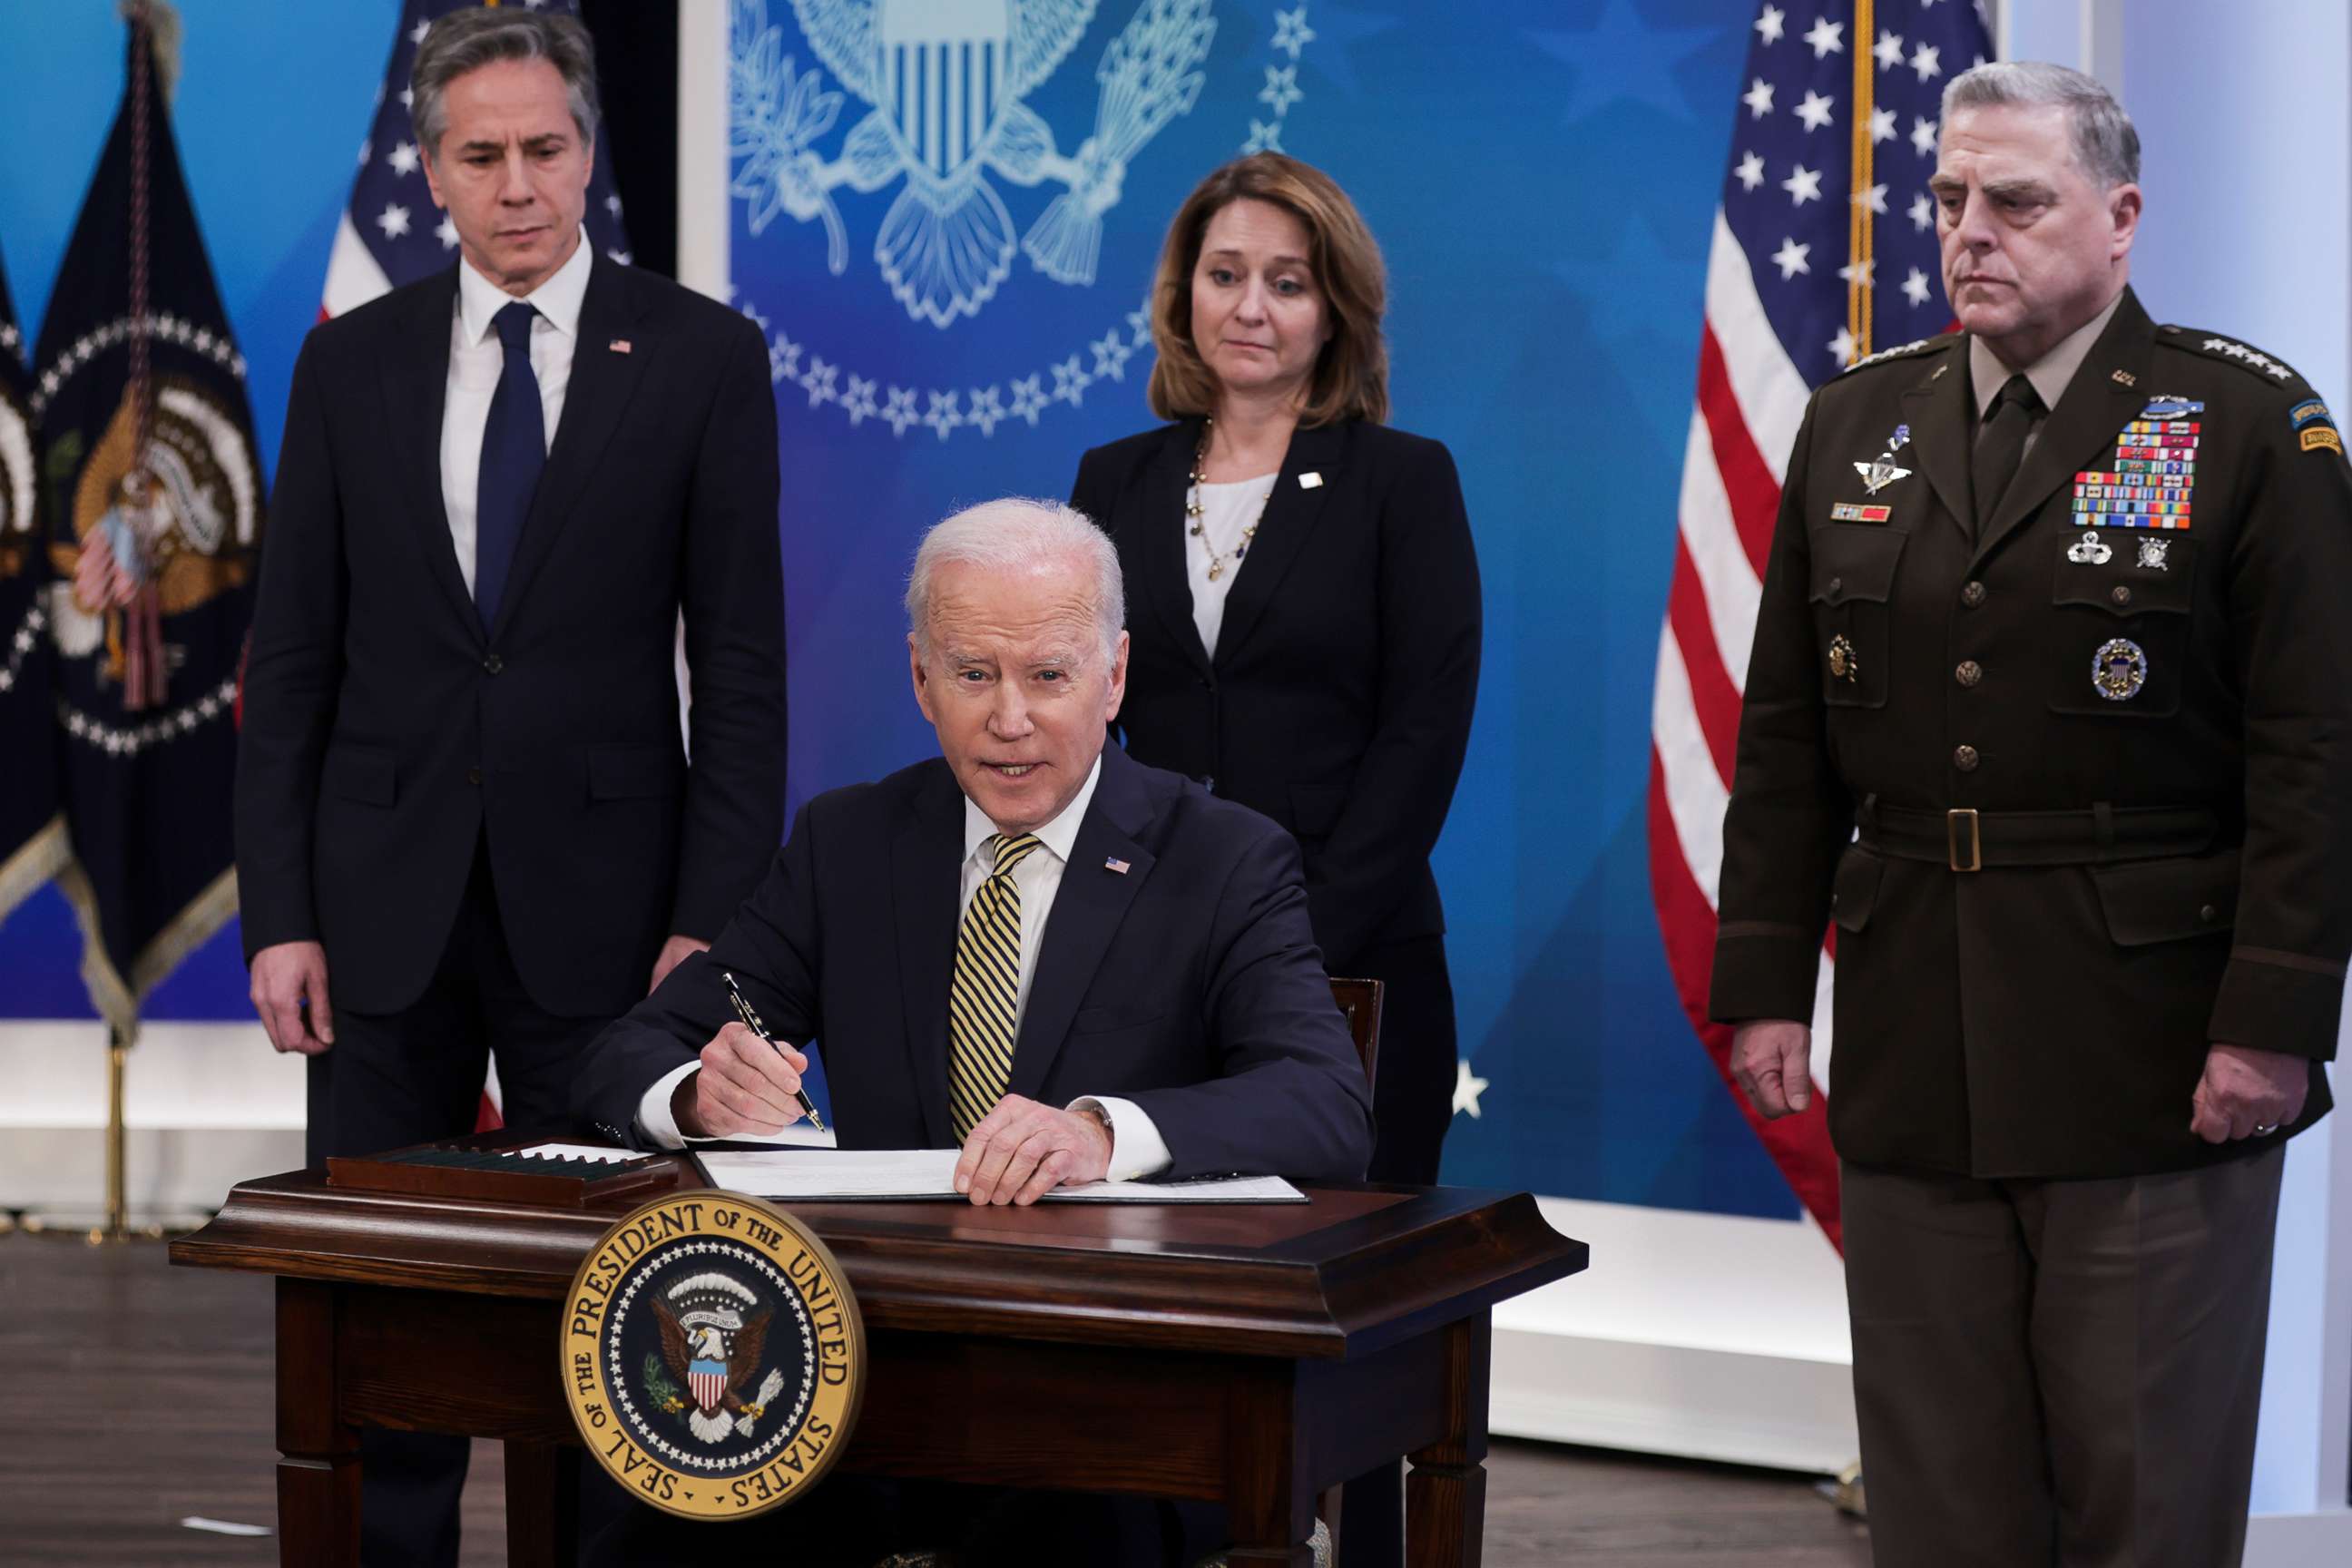 PHOTO: President Joe Biden signs legislative action to provide security aid and support to Ukraine at the Eisenhower Executive Office Building in Washington, March 16, 2022.